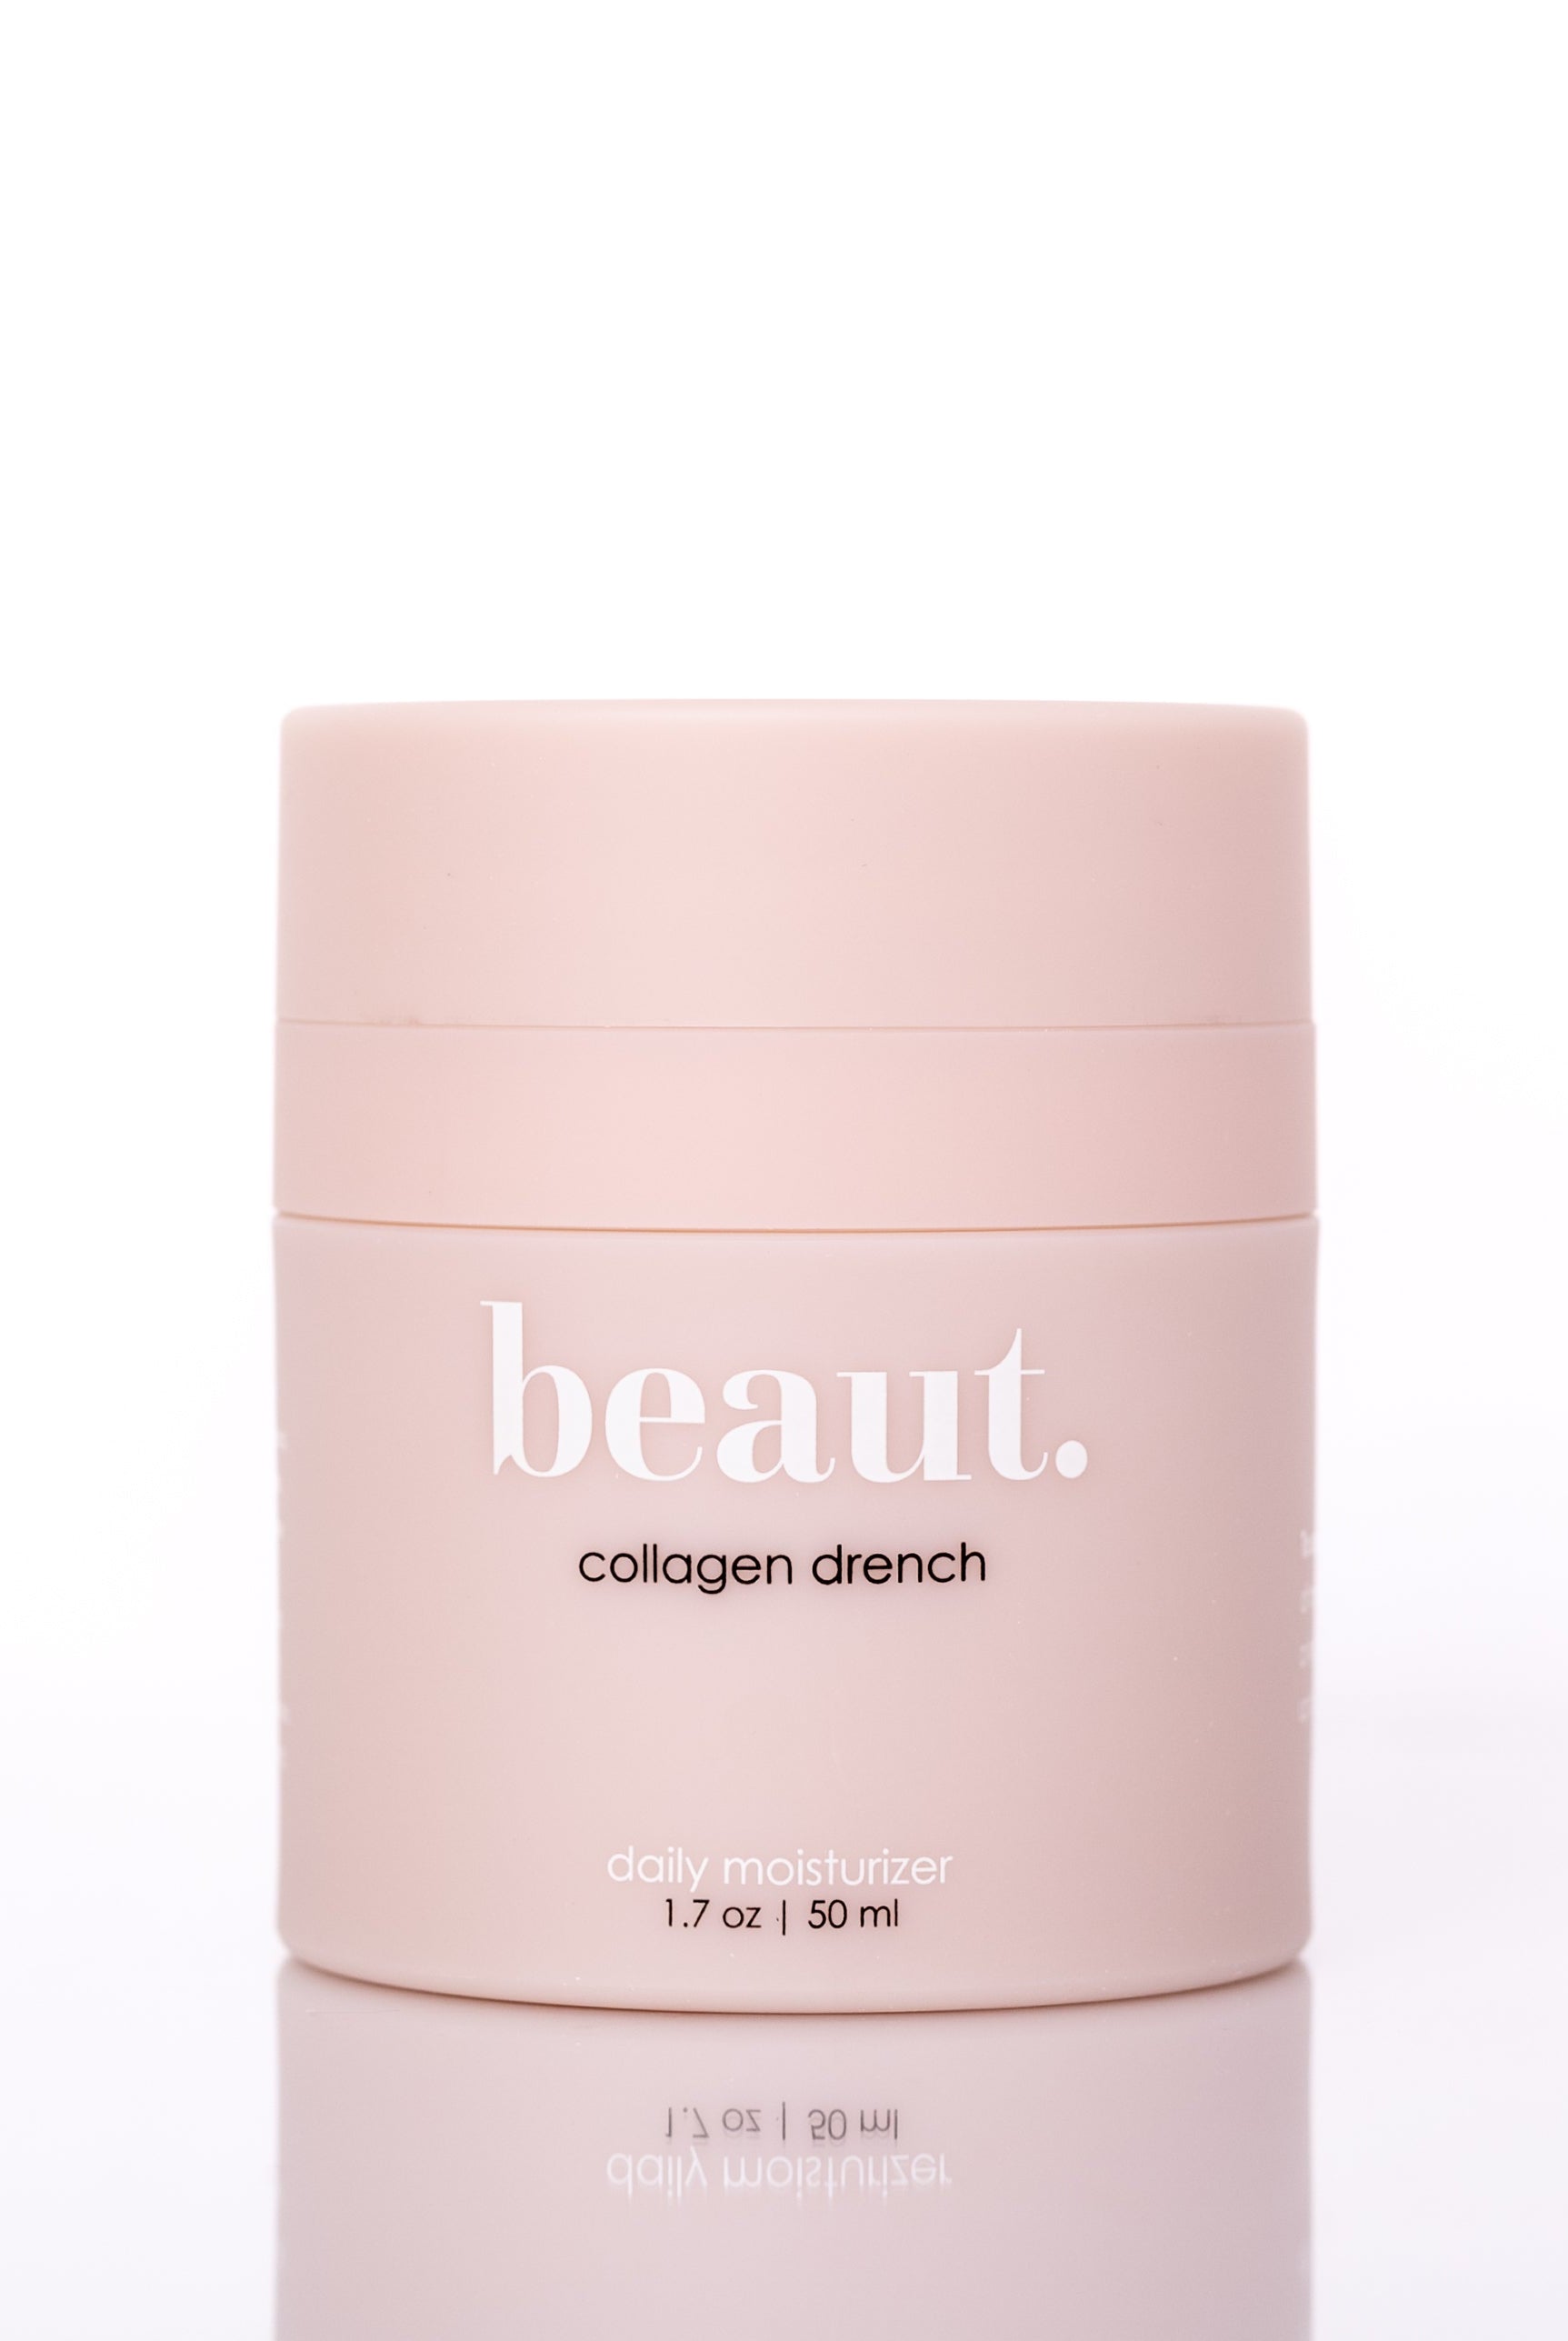 collagen drench-beaut.beautyco.-The Lovely Closet, Women's Fashion Boutique in Alexandria, KY